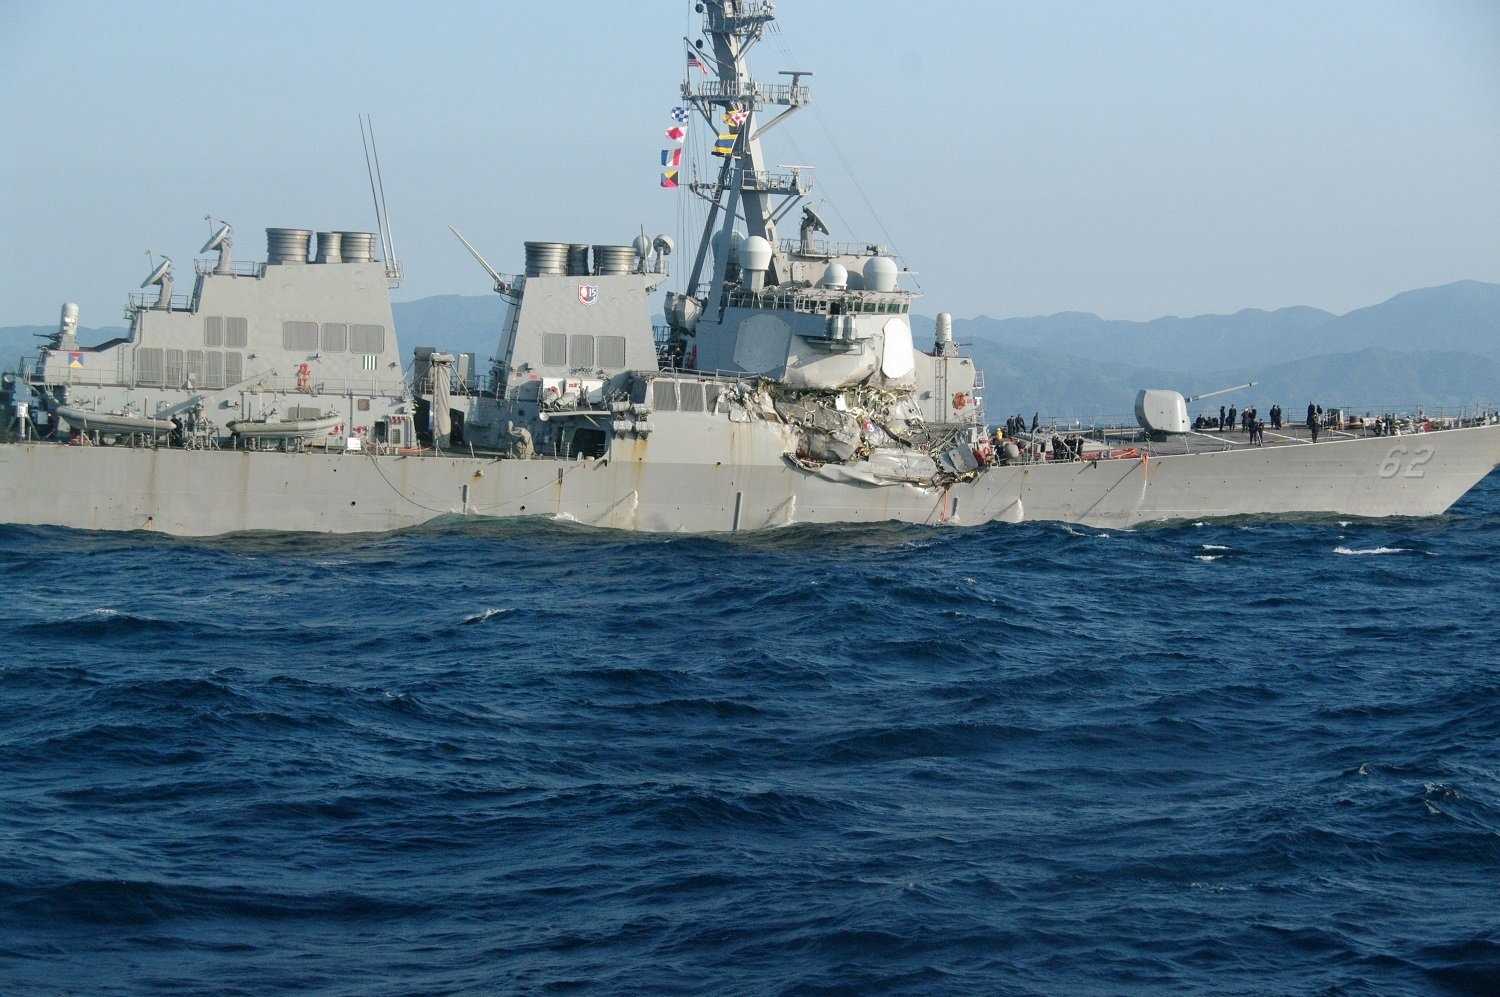 Initial investigation blames USS Fitzgerald crew for fatal collision